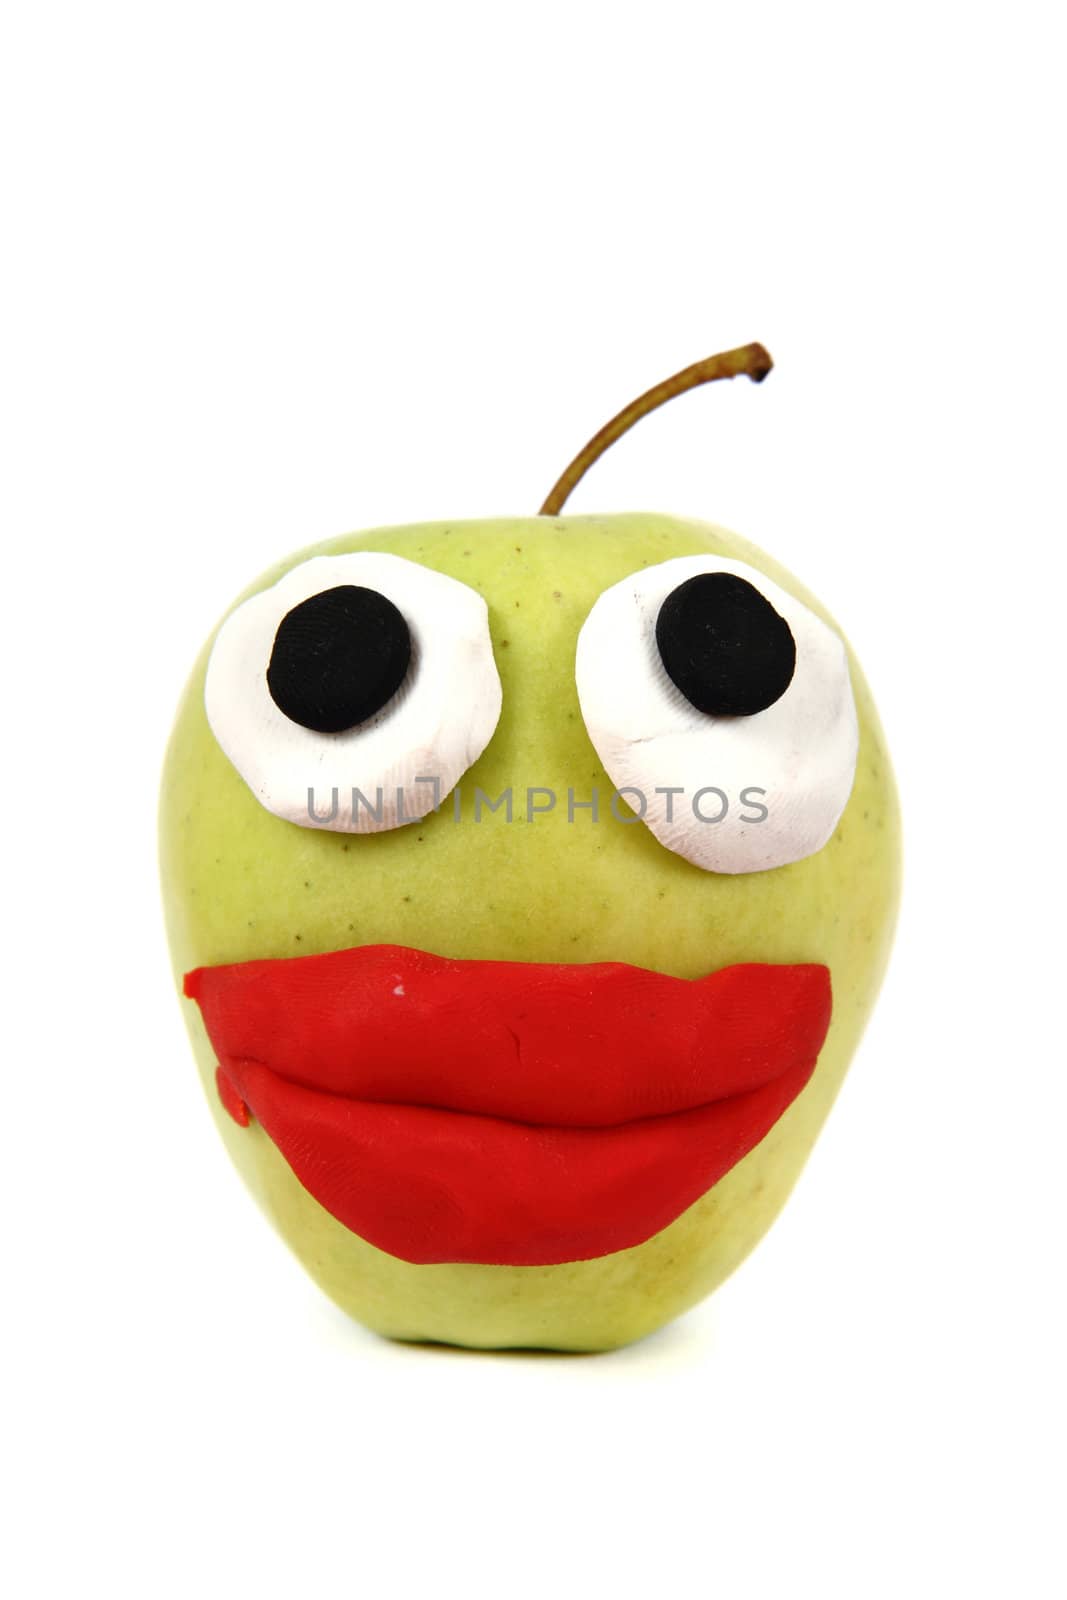 green apple with plasticine smile isolated on the white background